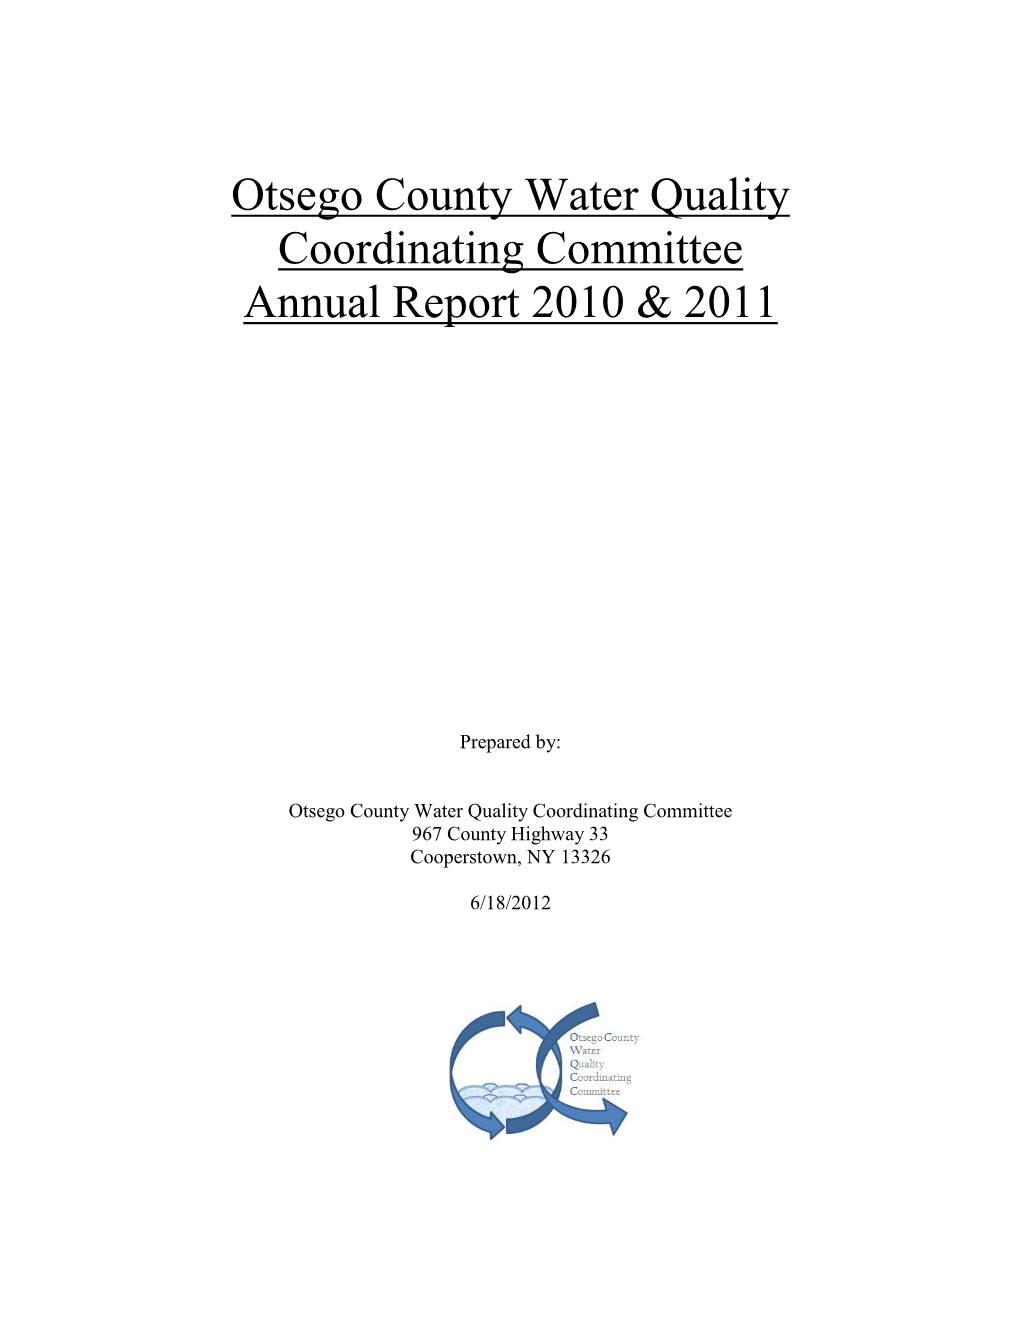 Otsego County Water Quality Coordinating Committee Annual Report 2010 & 2011